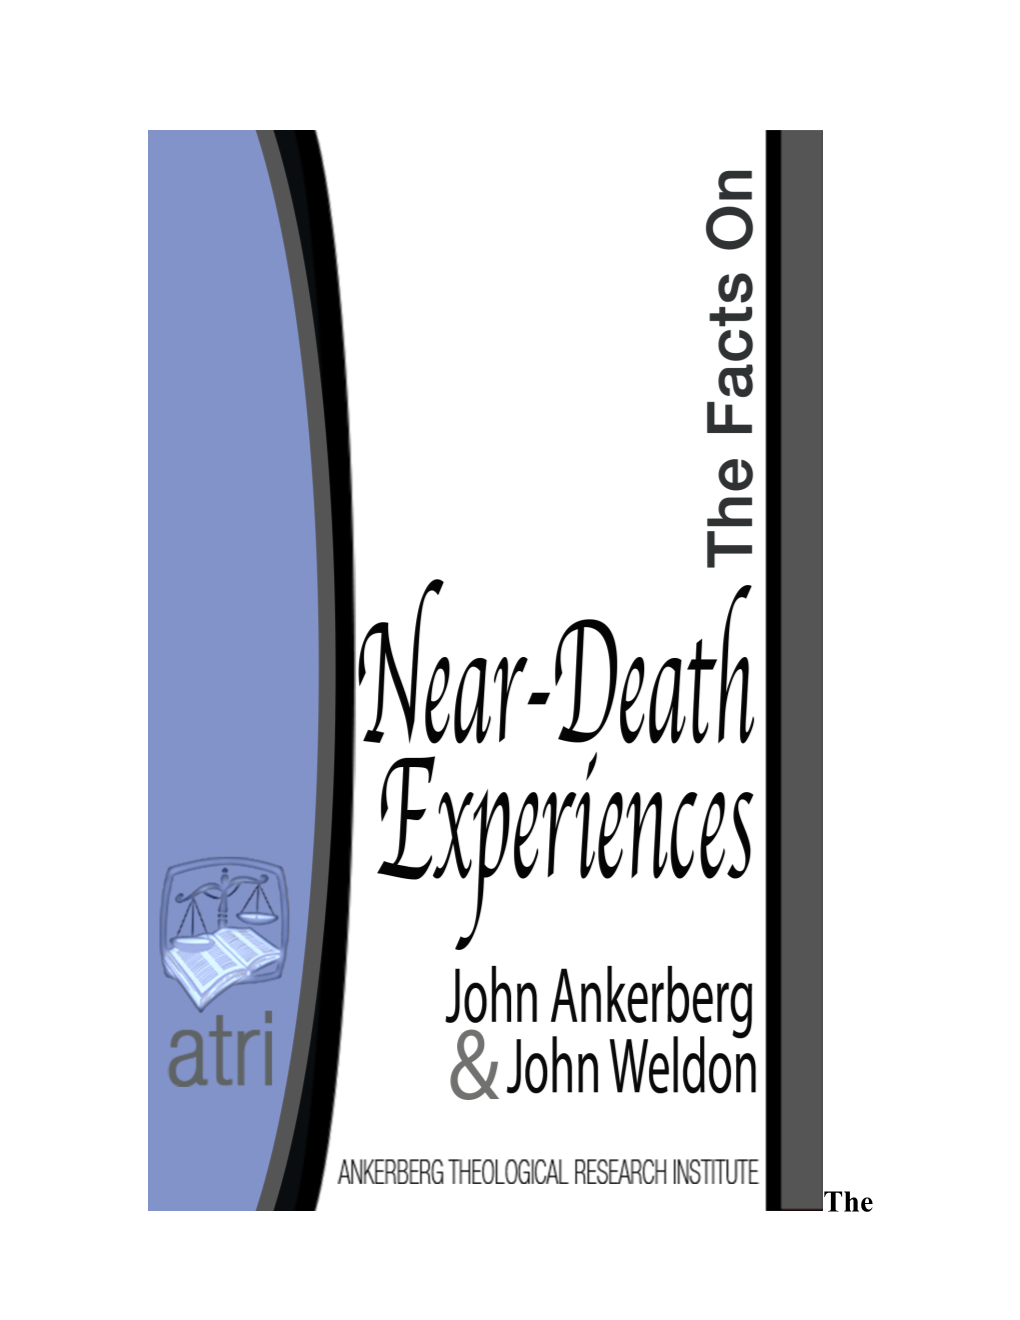 Facts on Near-Death Experiences